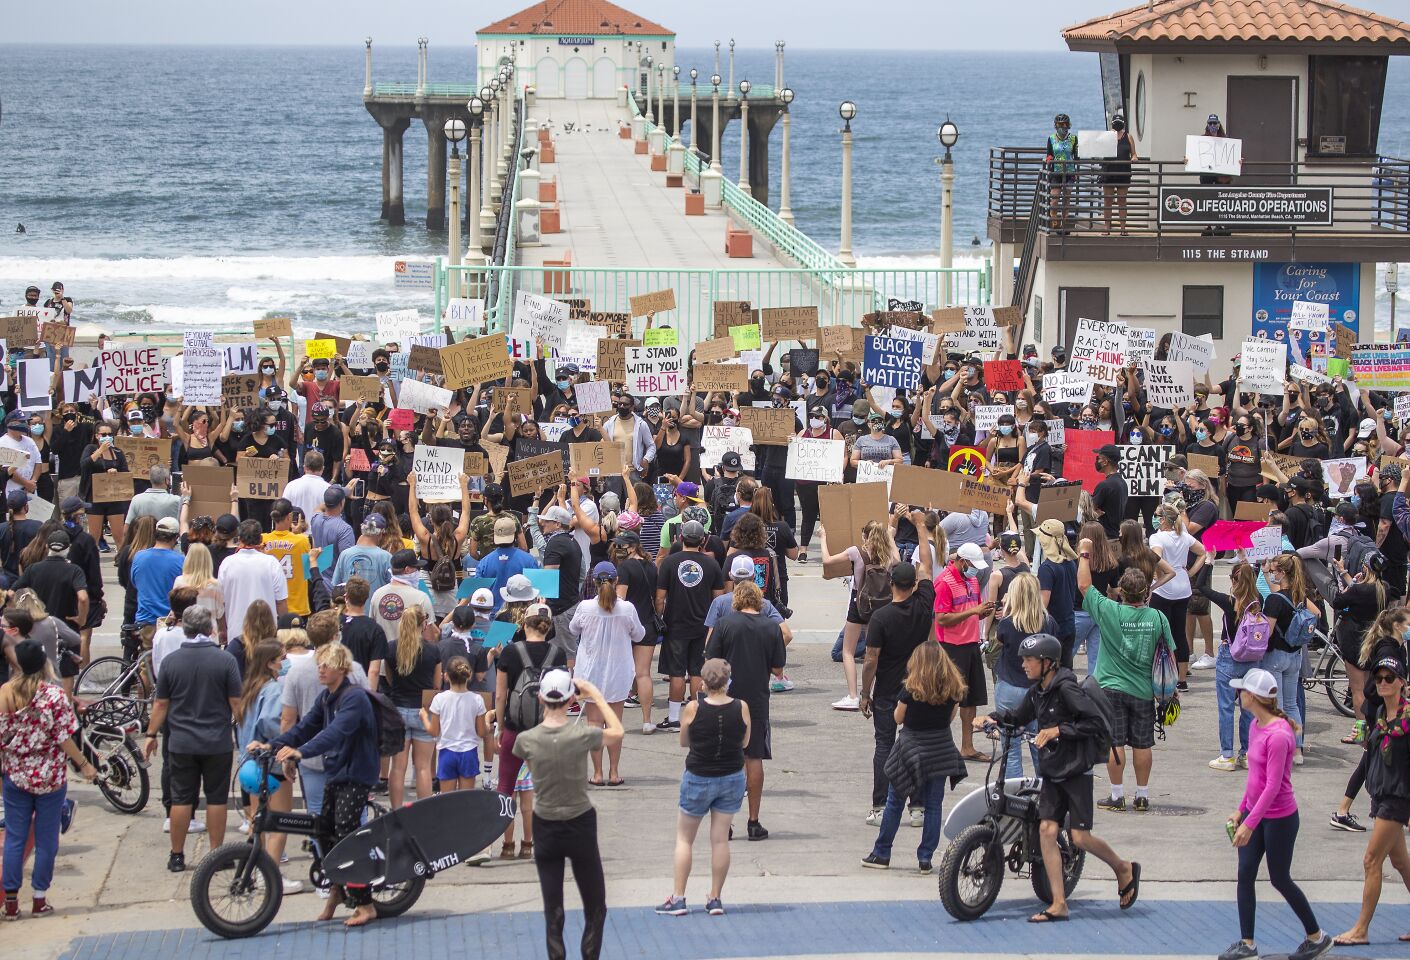 Several hundred protesters gather to demand justice for George Floyd at the Manhattan Beach Pier Plaza